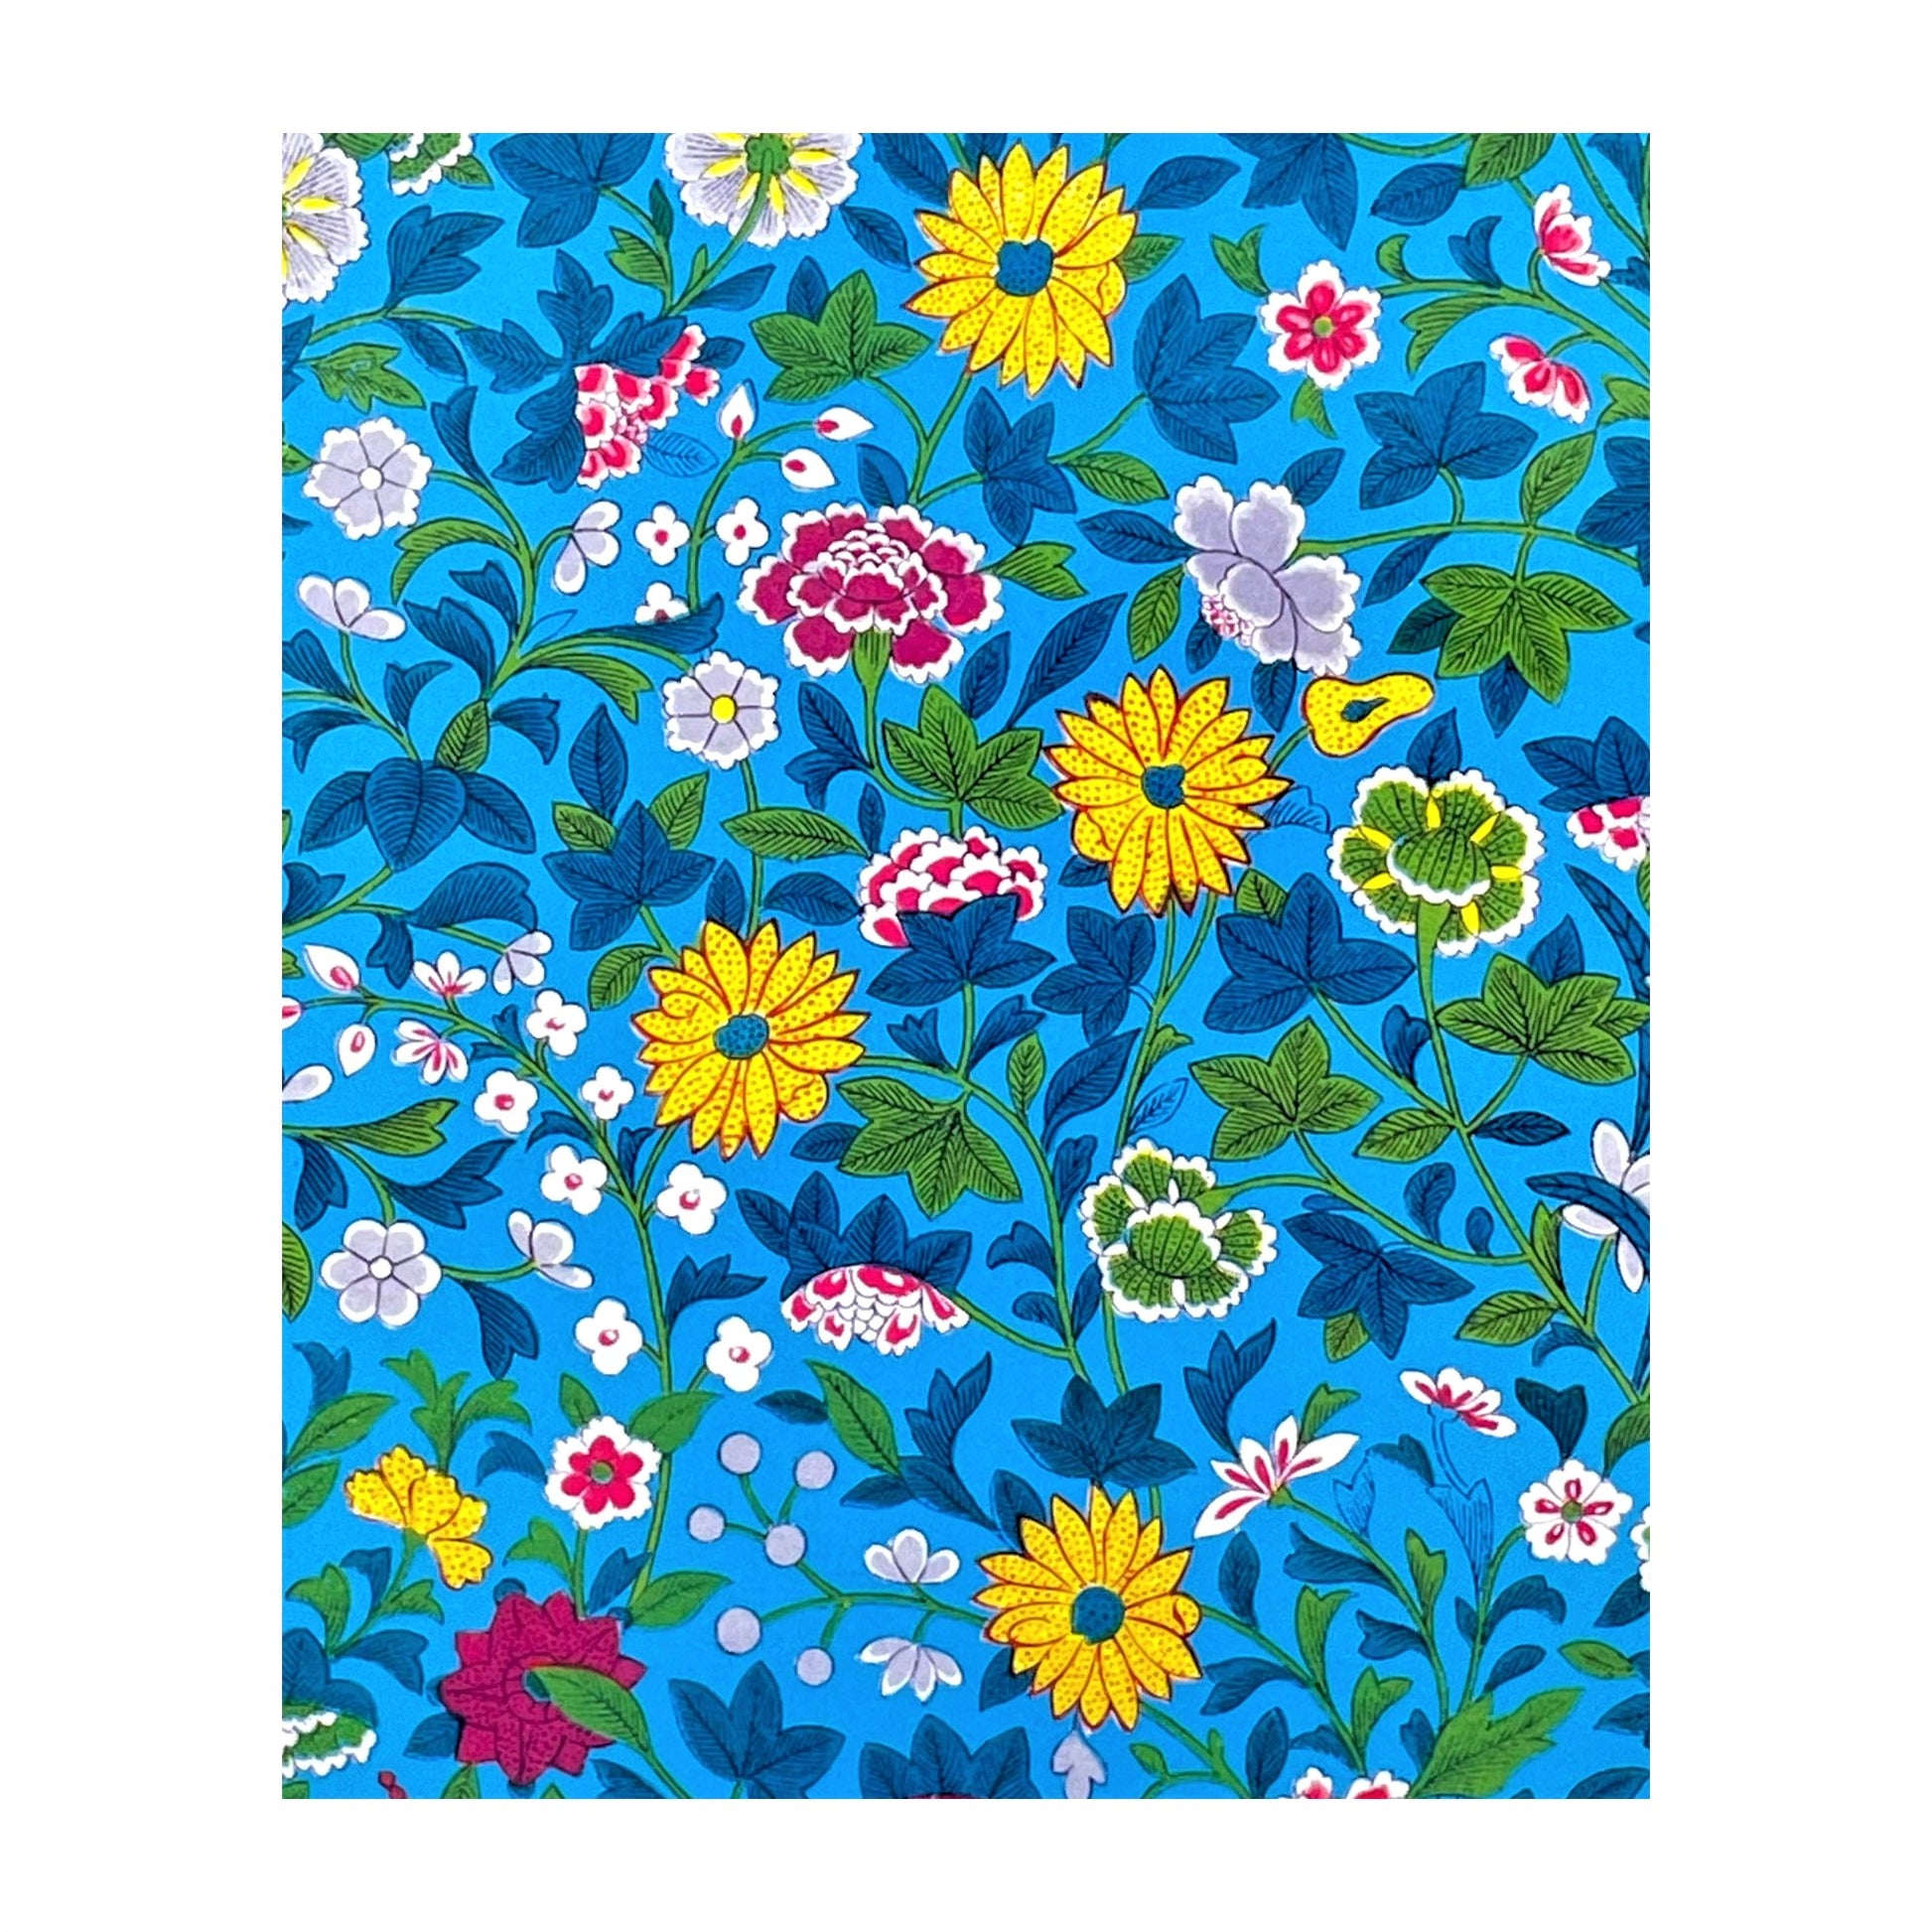 greetings card showing a floral repeat pattern on a blue background